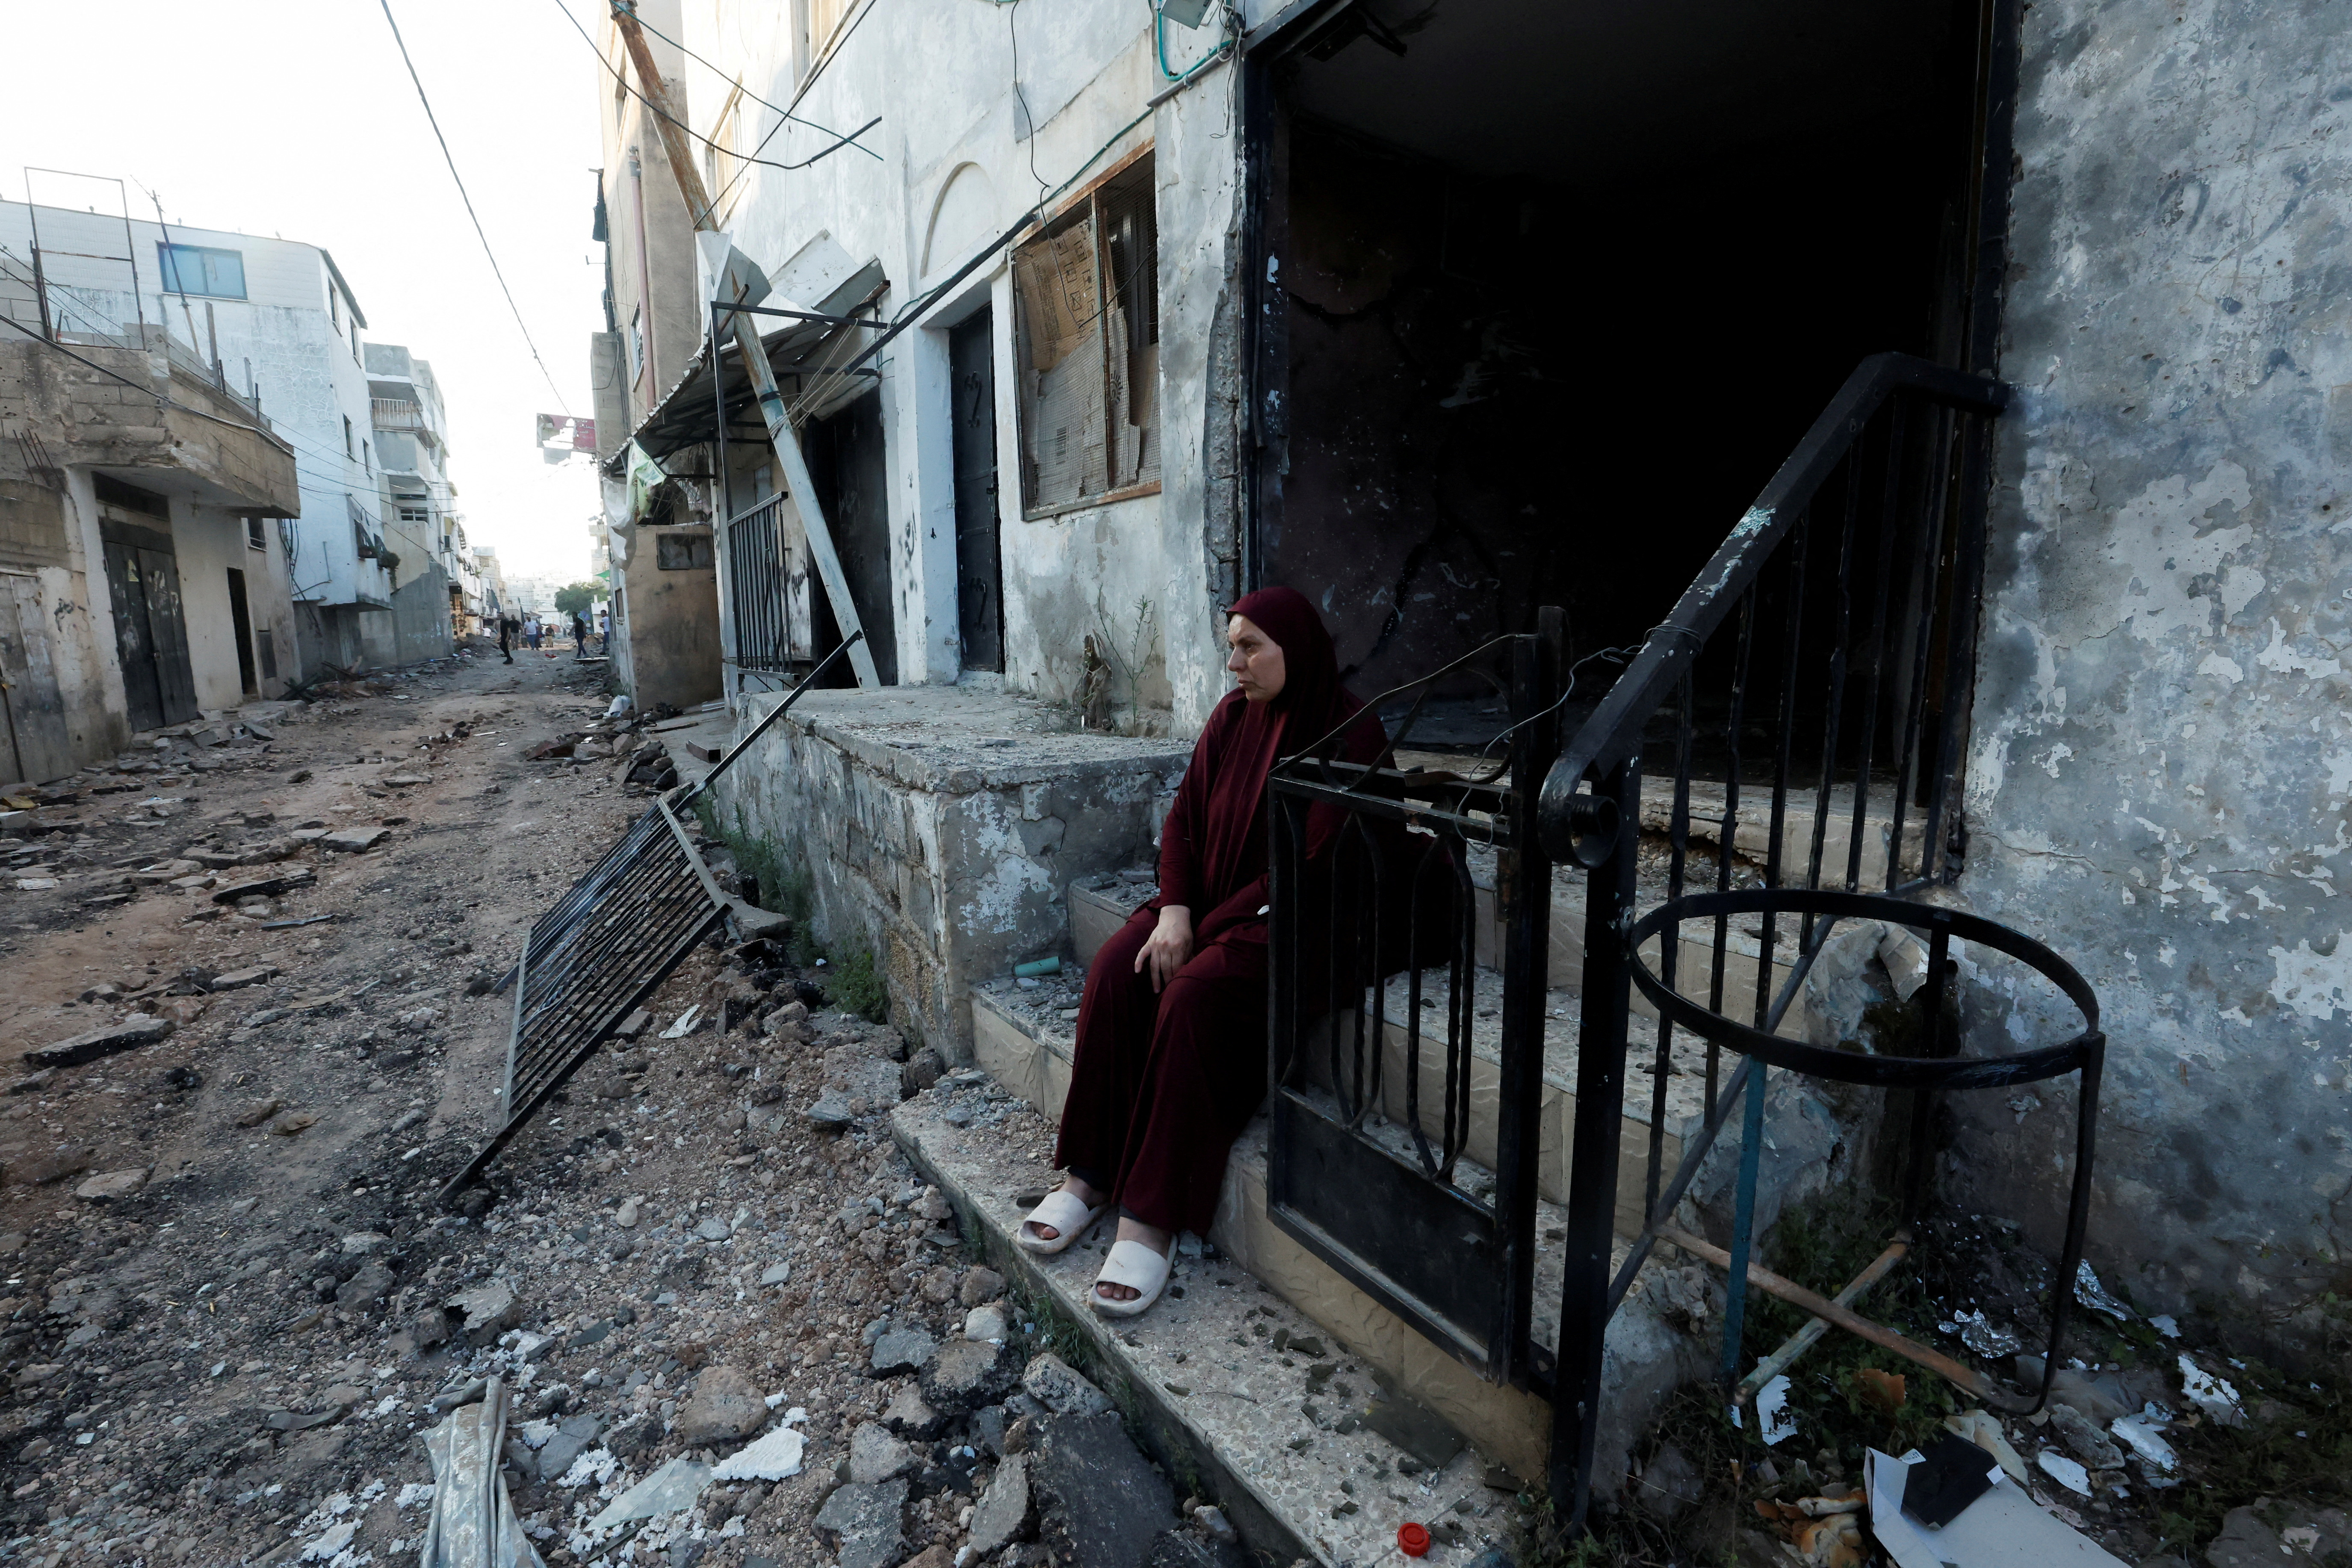 Palestinians inspect damage after the Israeli army's withdrawal from the Jenin camp